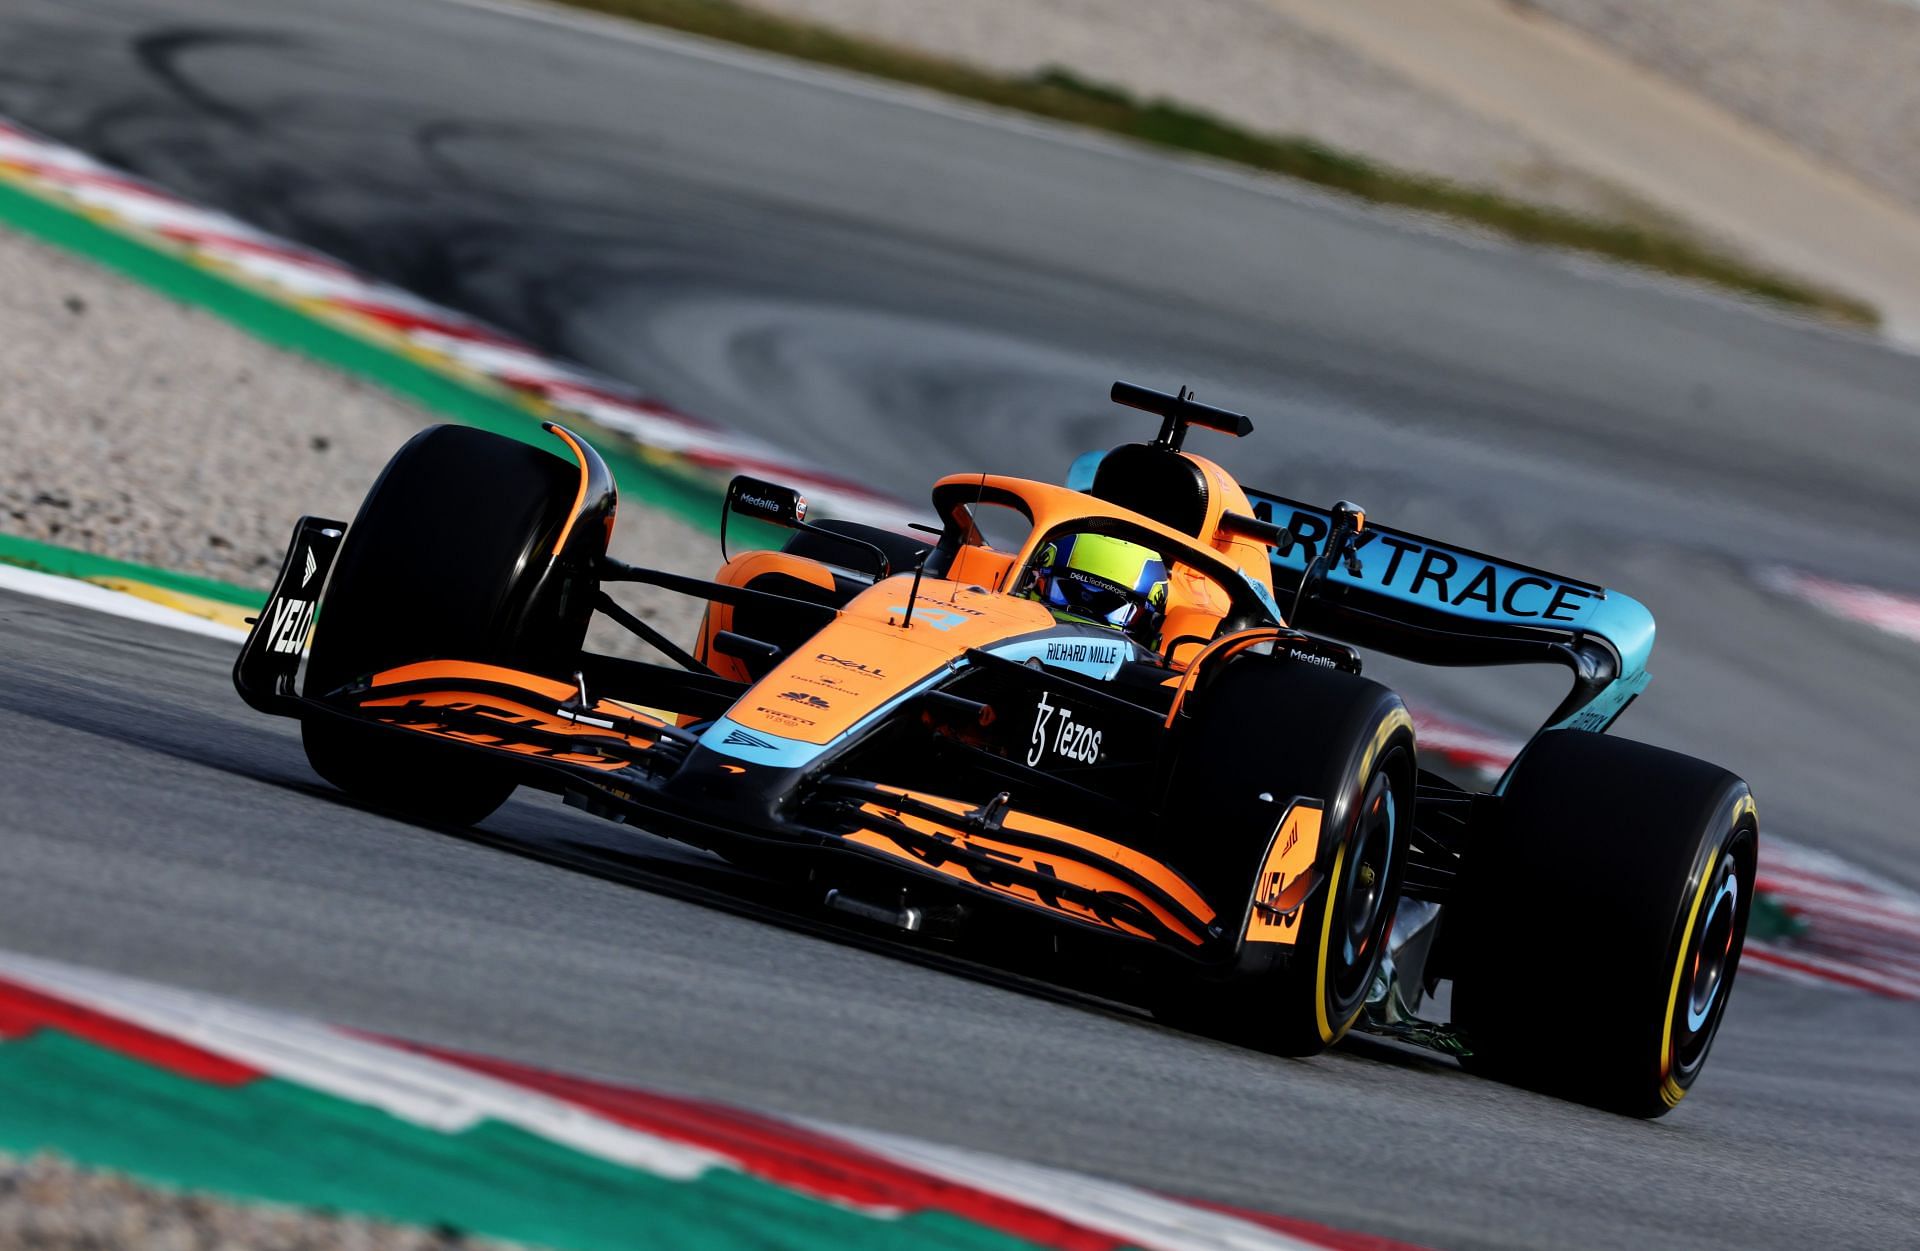 Lando Norris in action during pre-season testing in Barcelona (Photo by Mark Thompson/Getty Images)